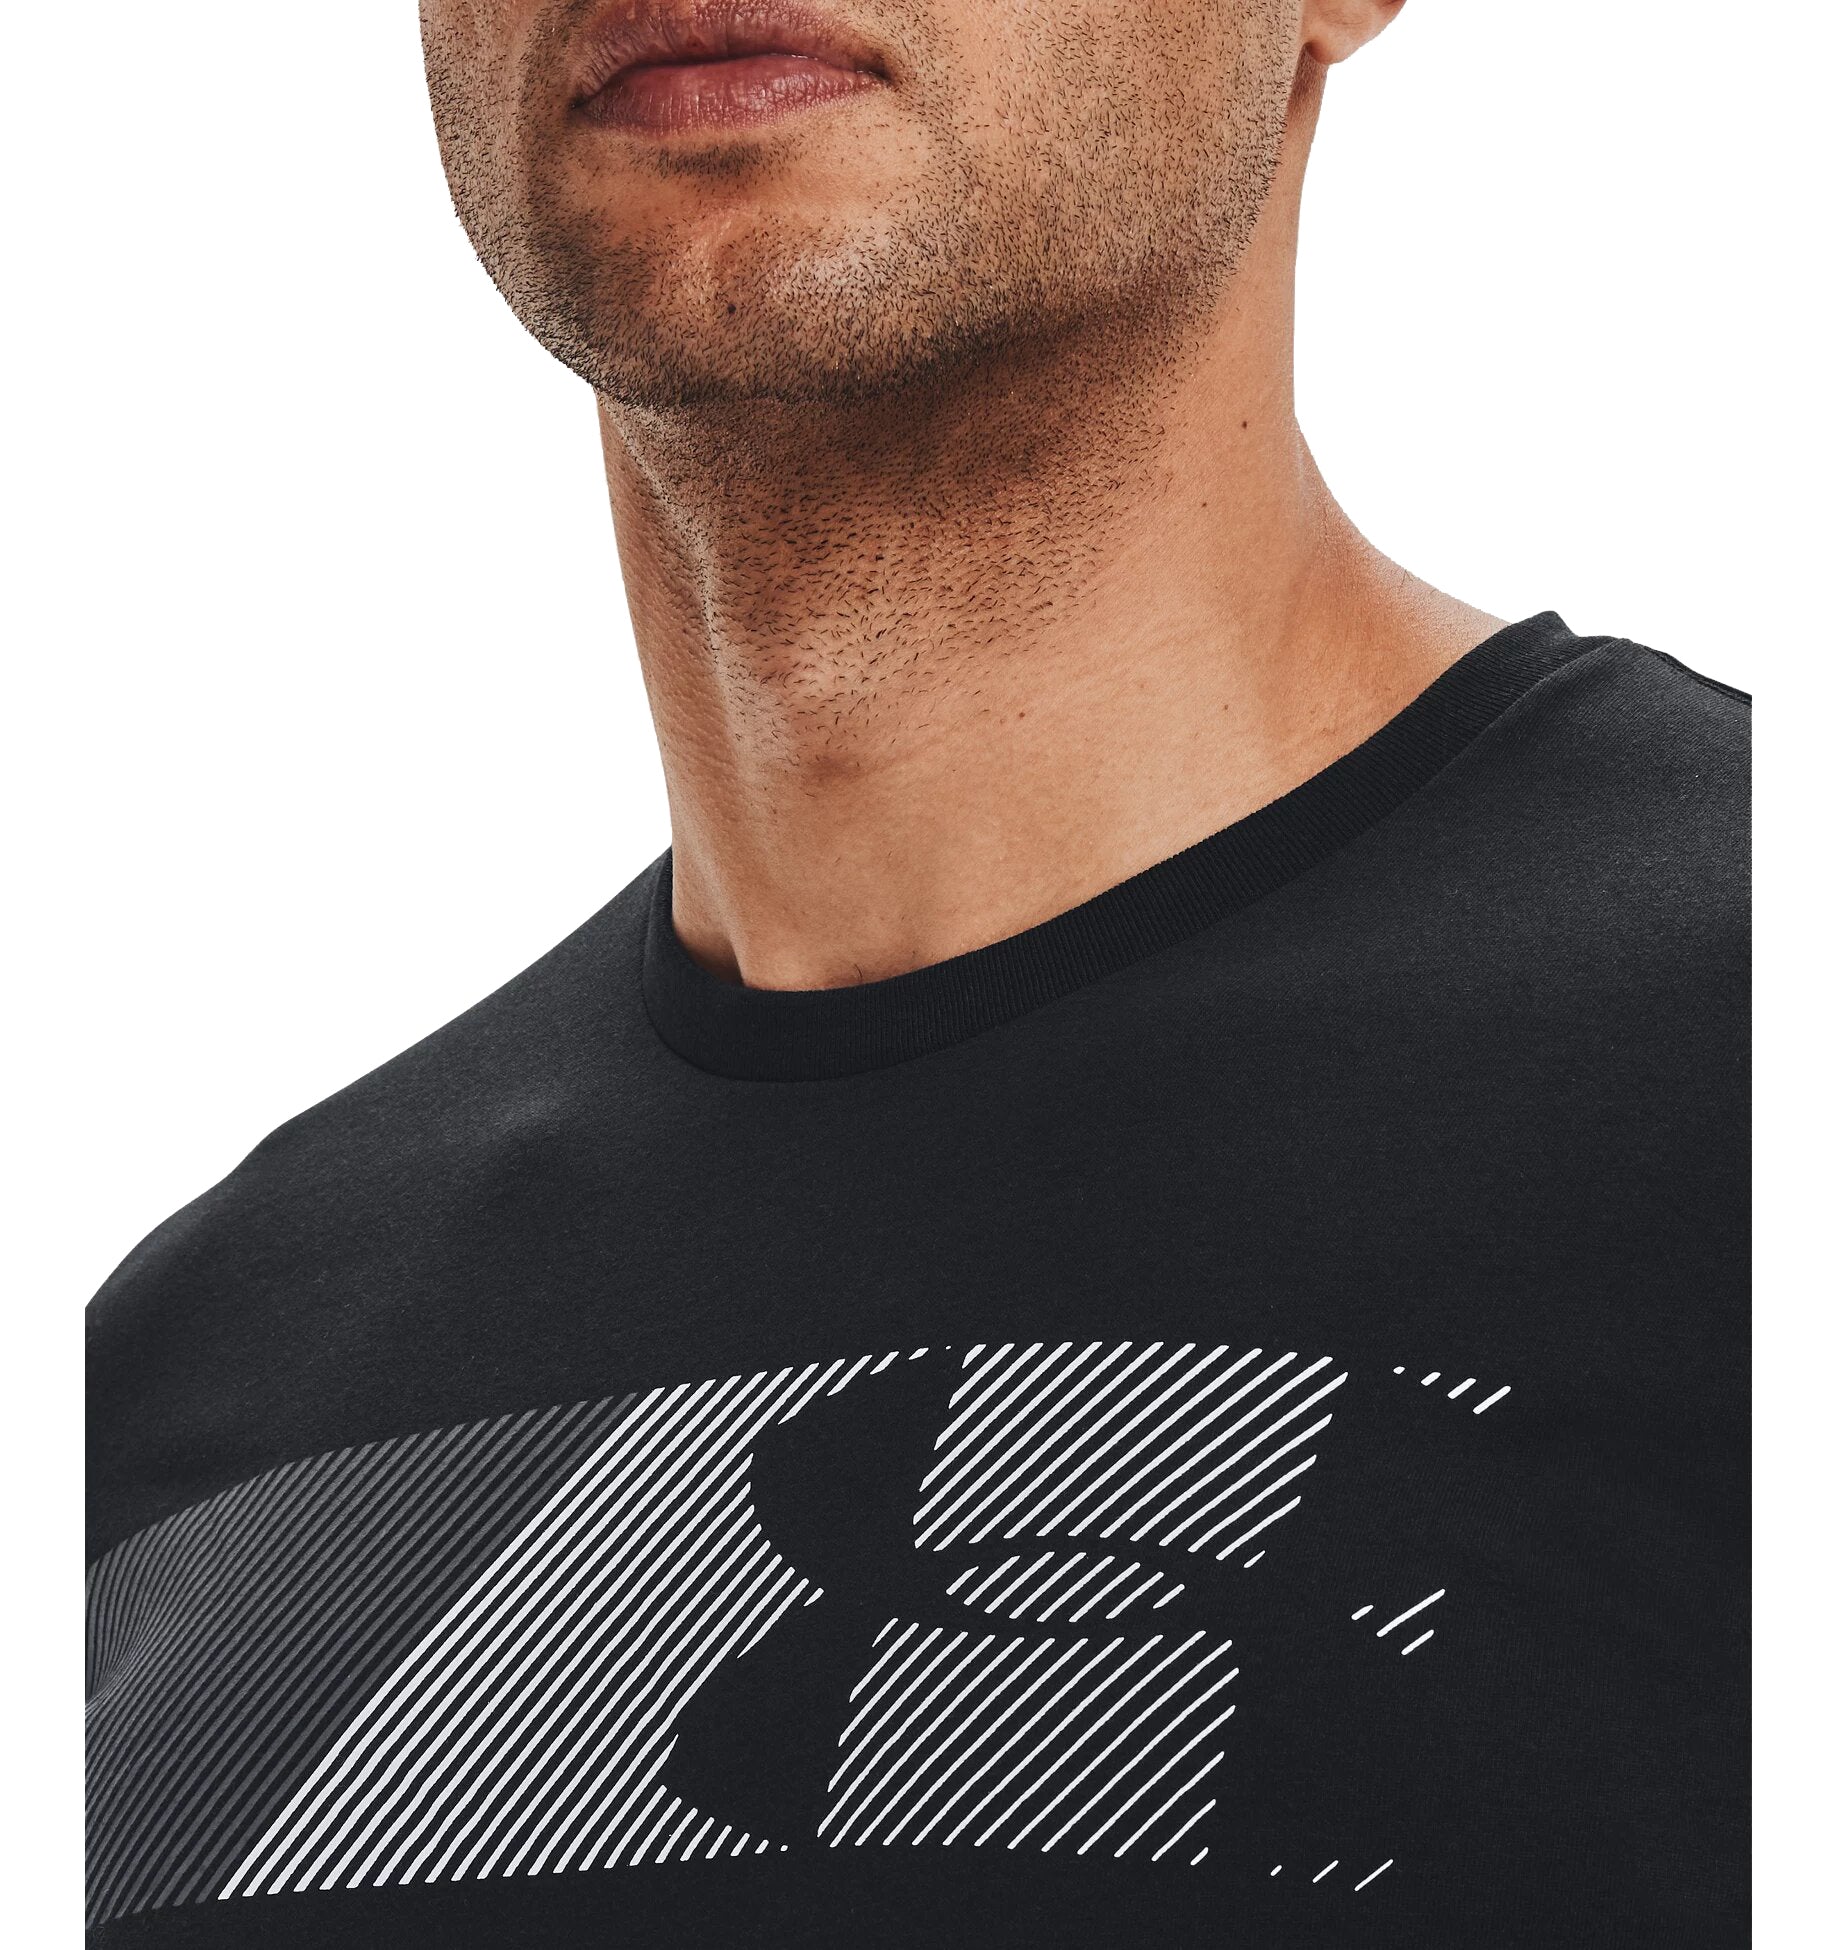 Polo Under Armour Hombre Fast Left Chest | 1329584-001